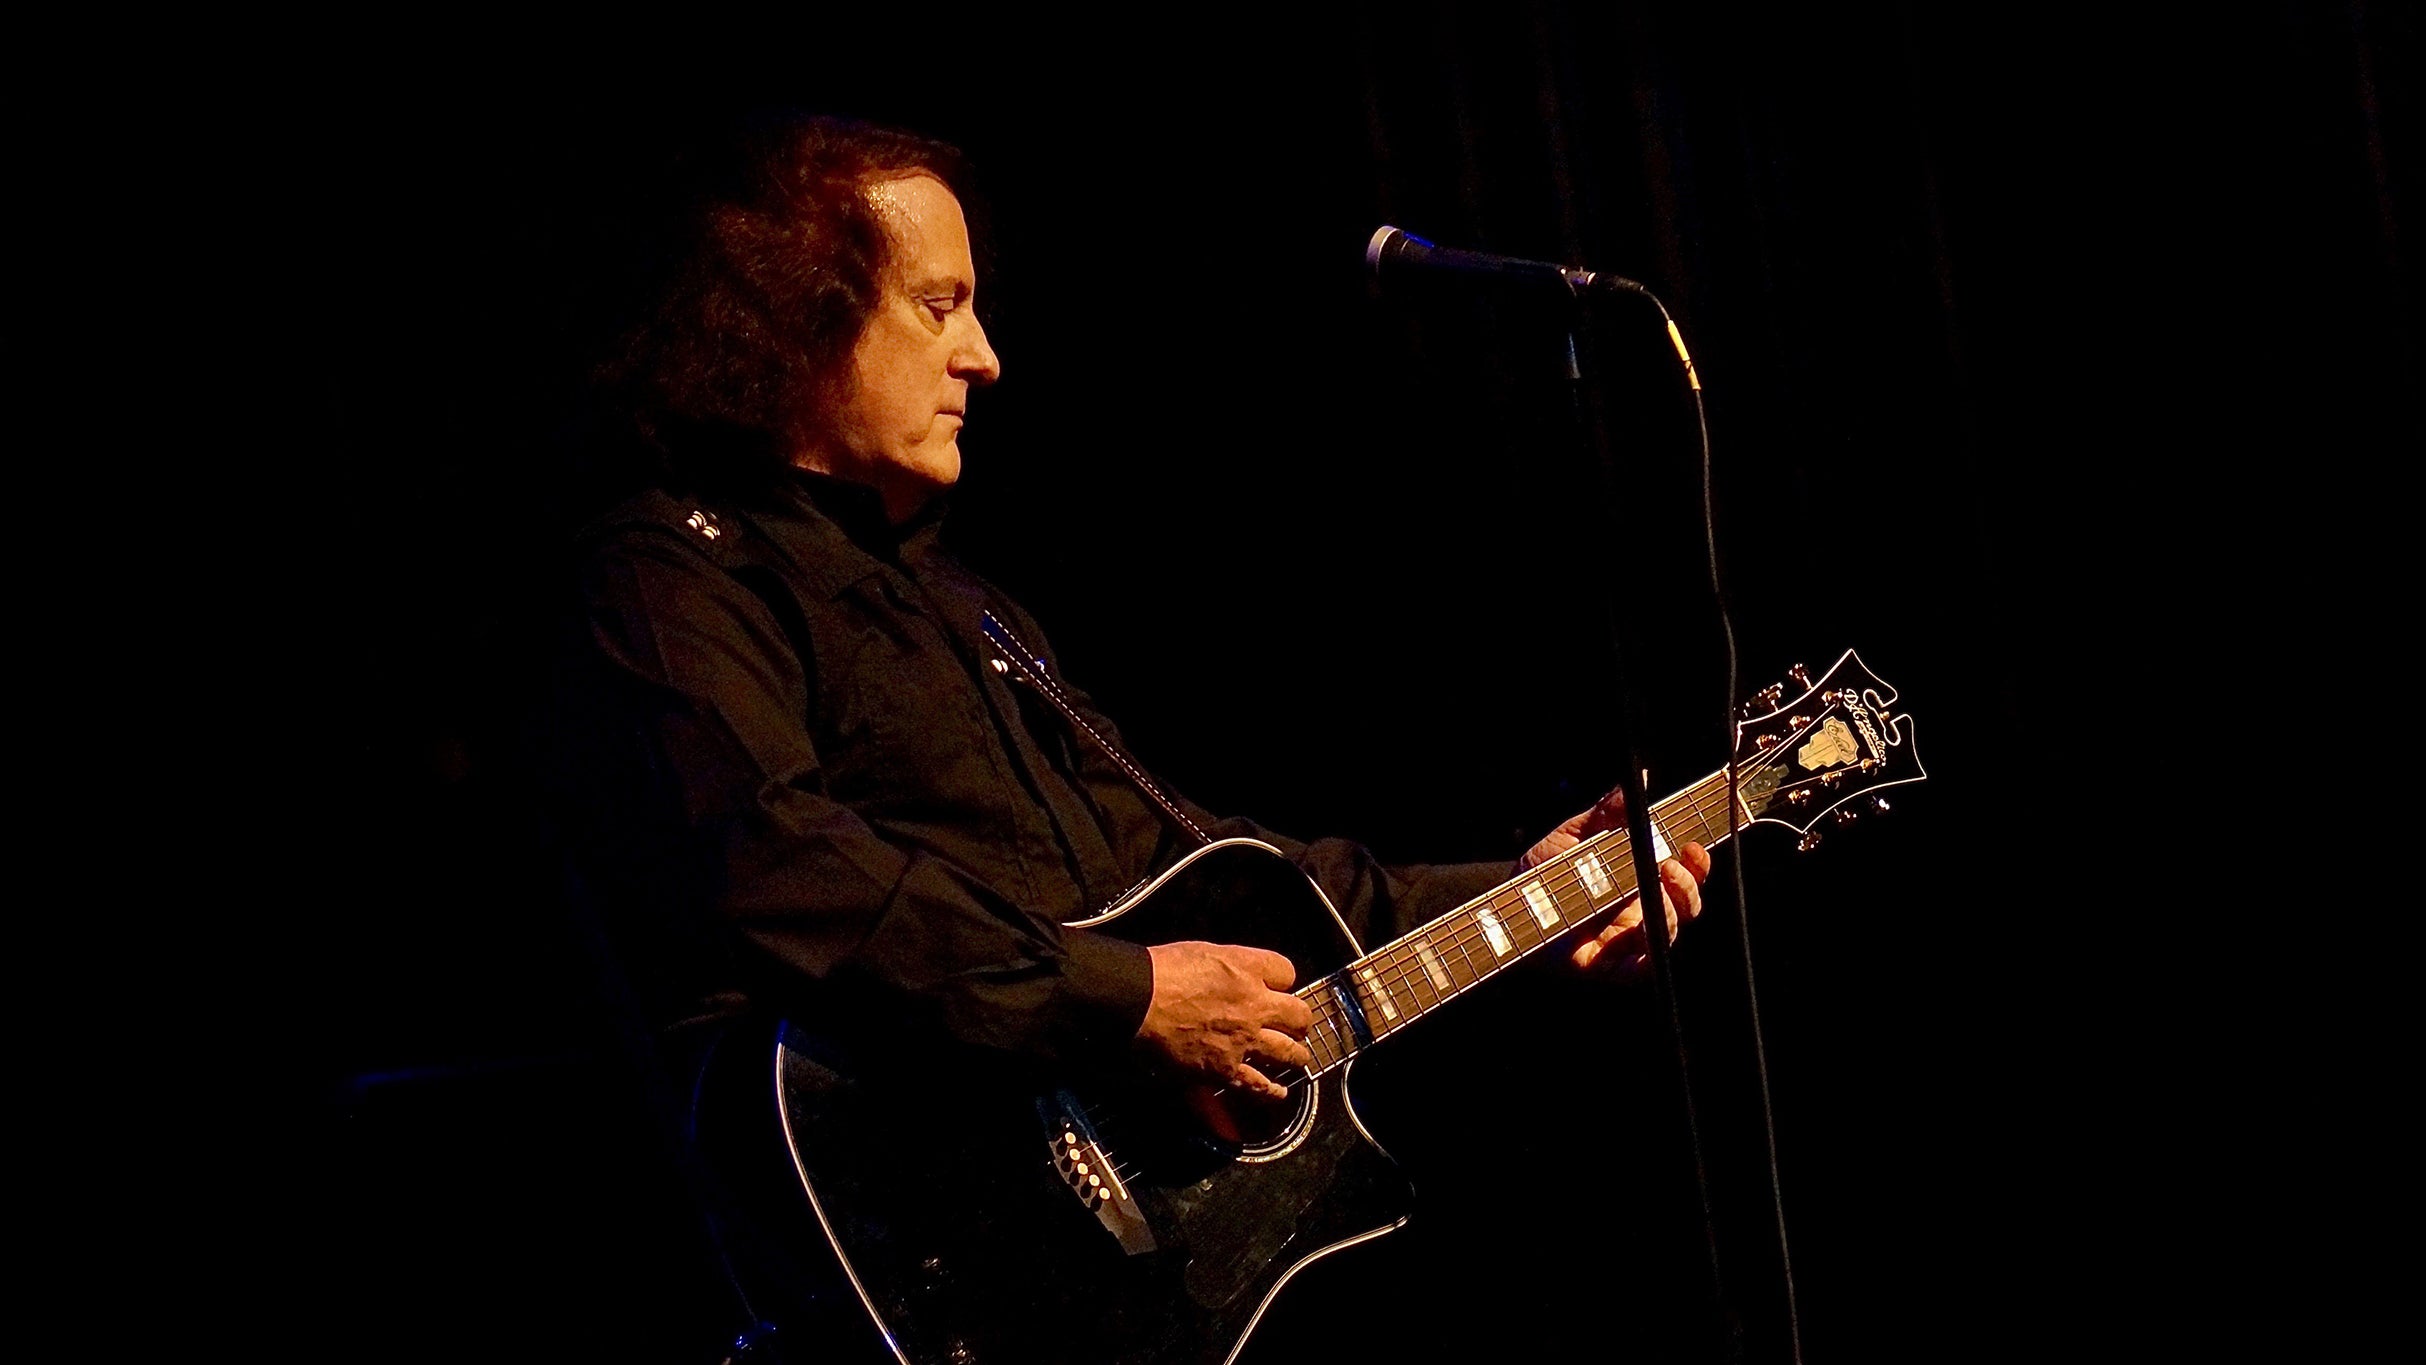 Tommy James and the Shondells at Ludlow Garage Cincinnati